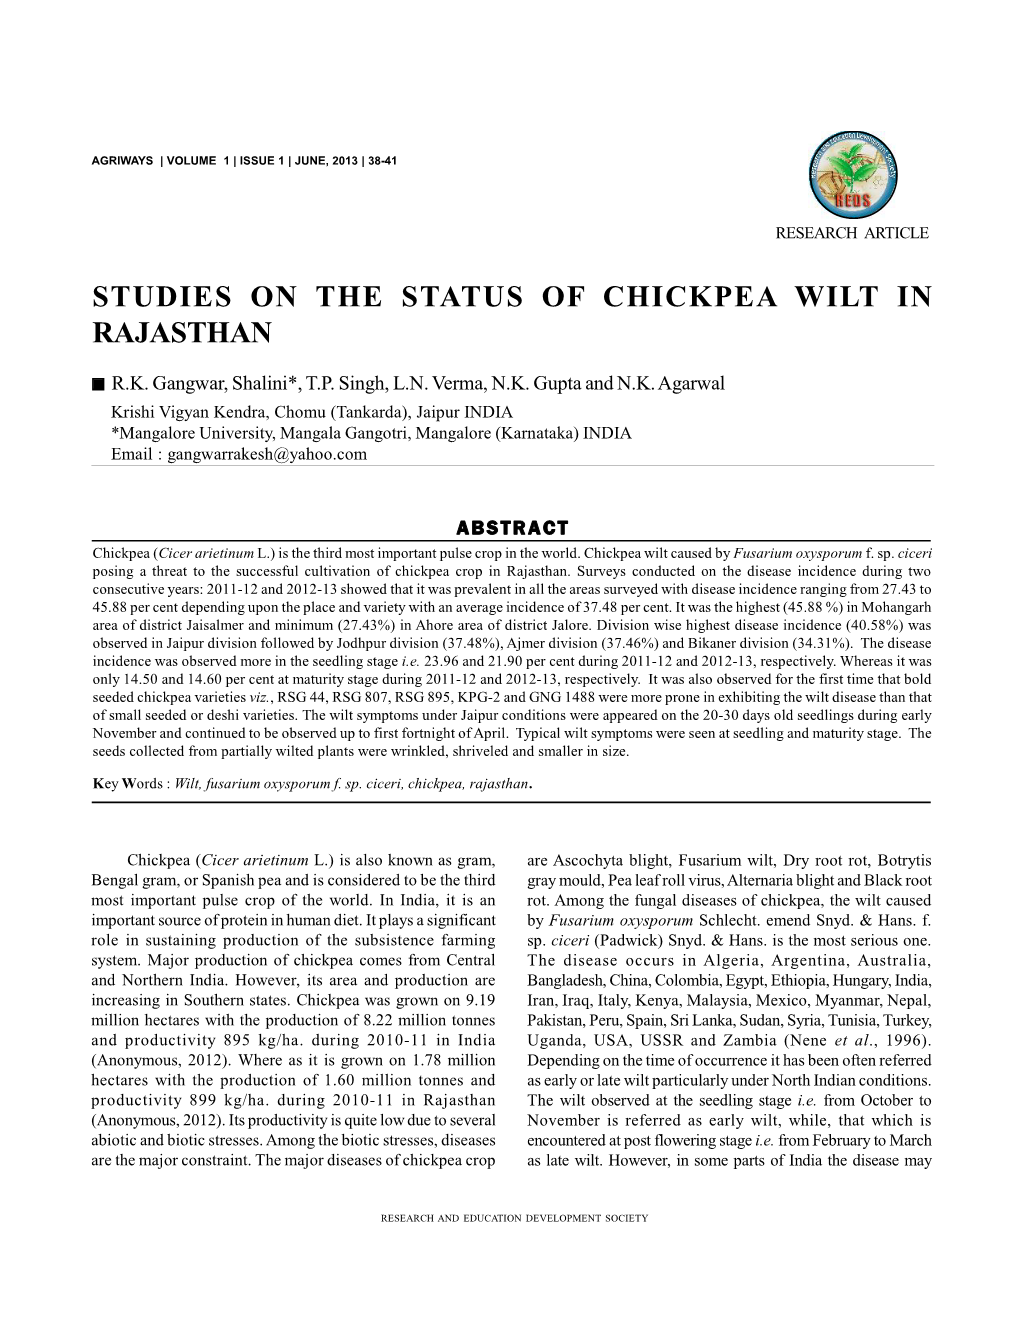 Studies on the Status of Chickpea Wilt in Rajasthan